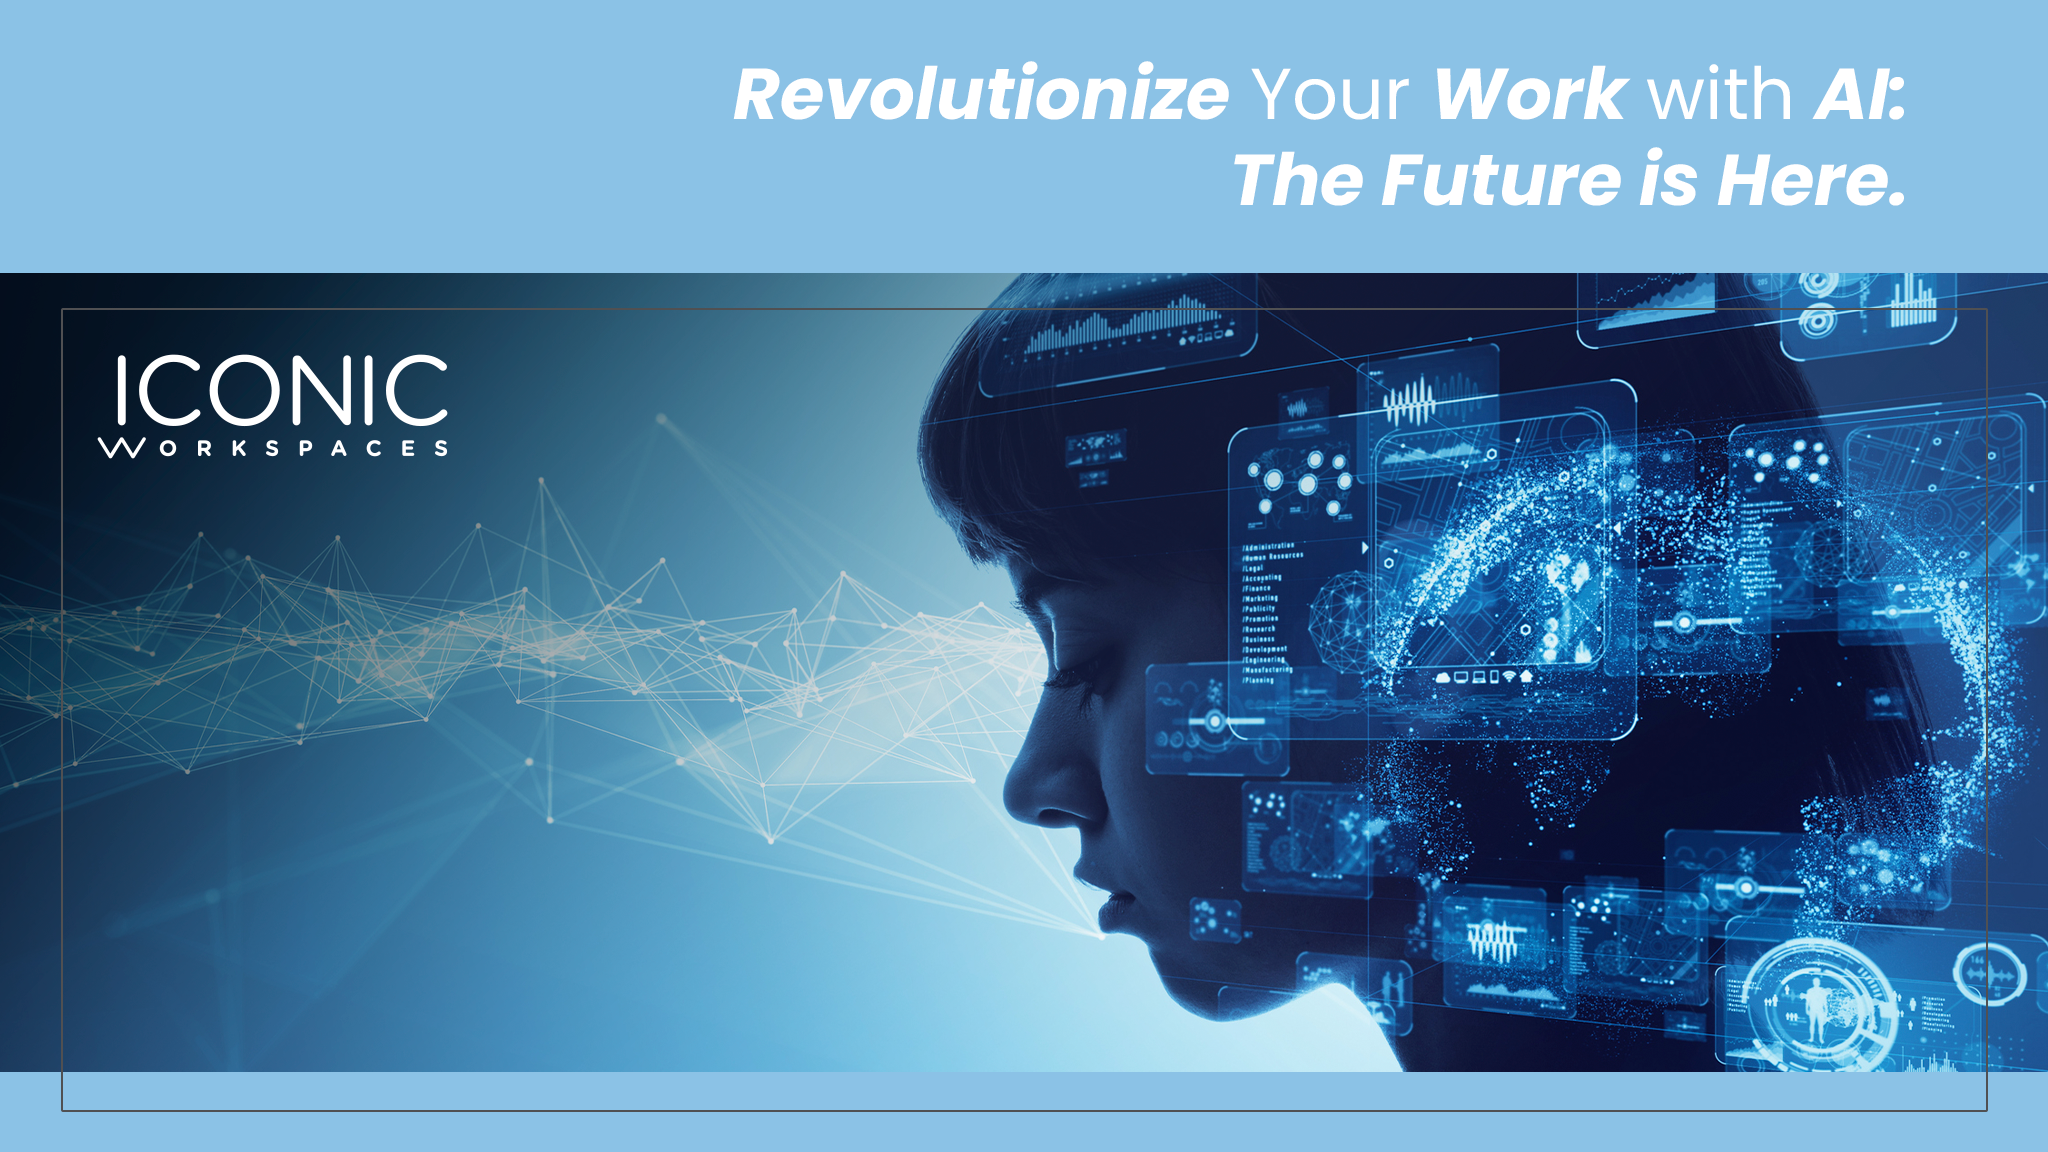 Revolutionize Your Work with AI: The Future is Here